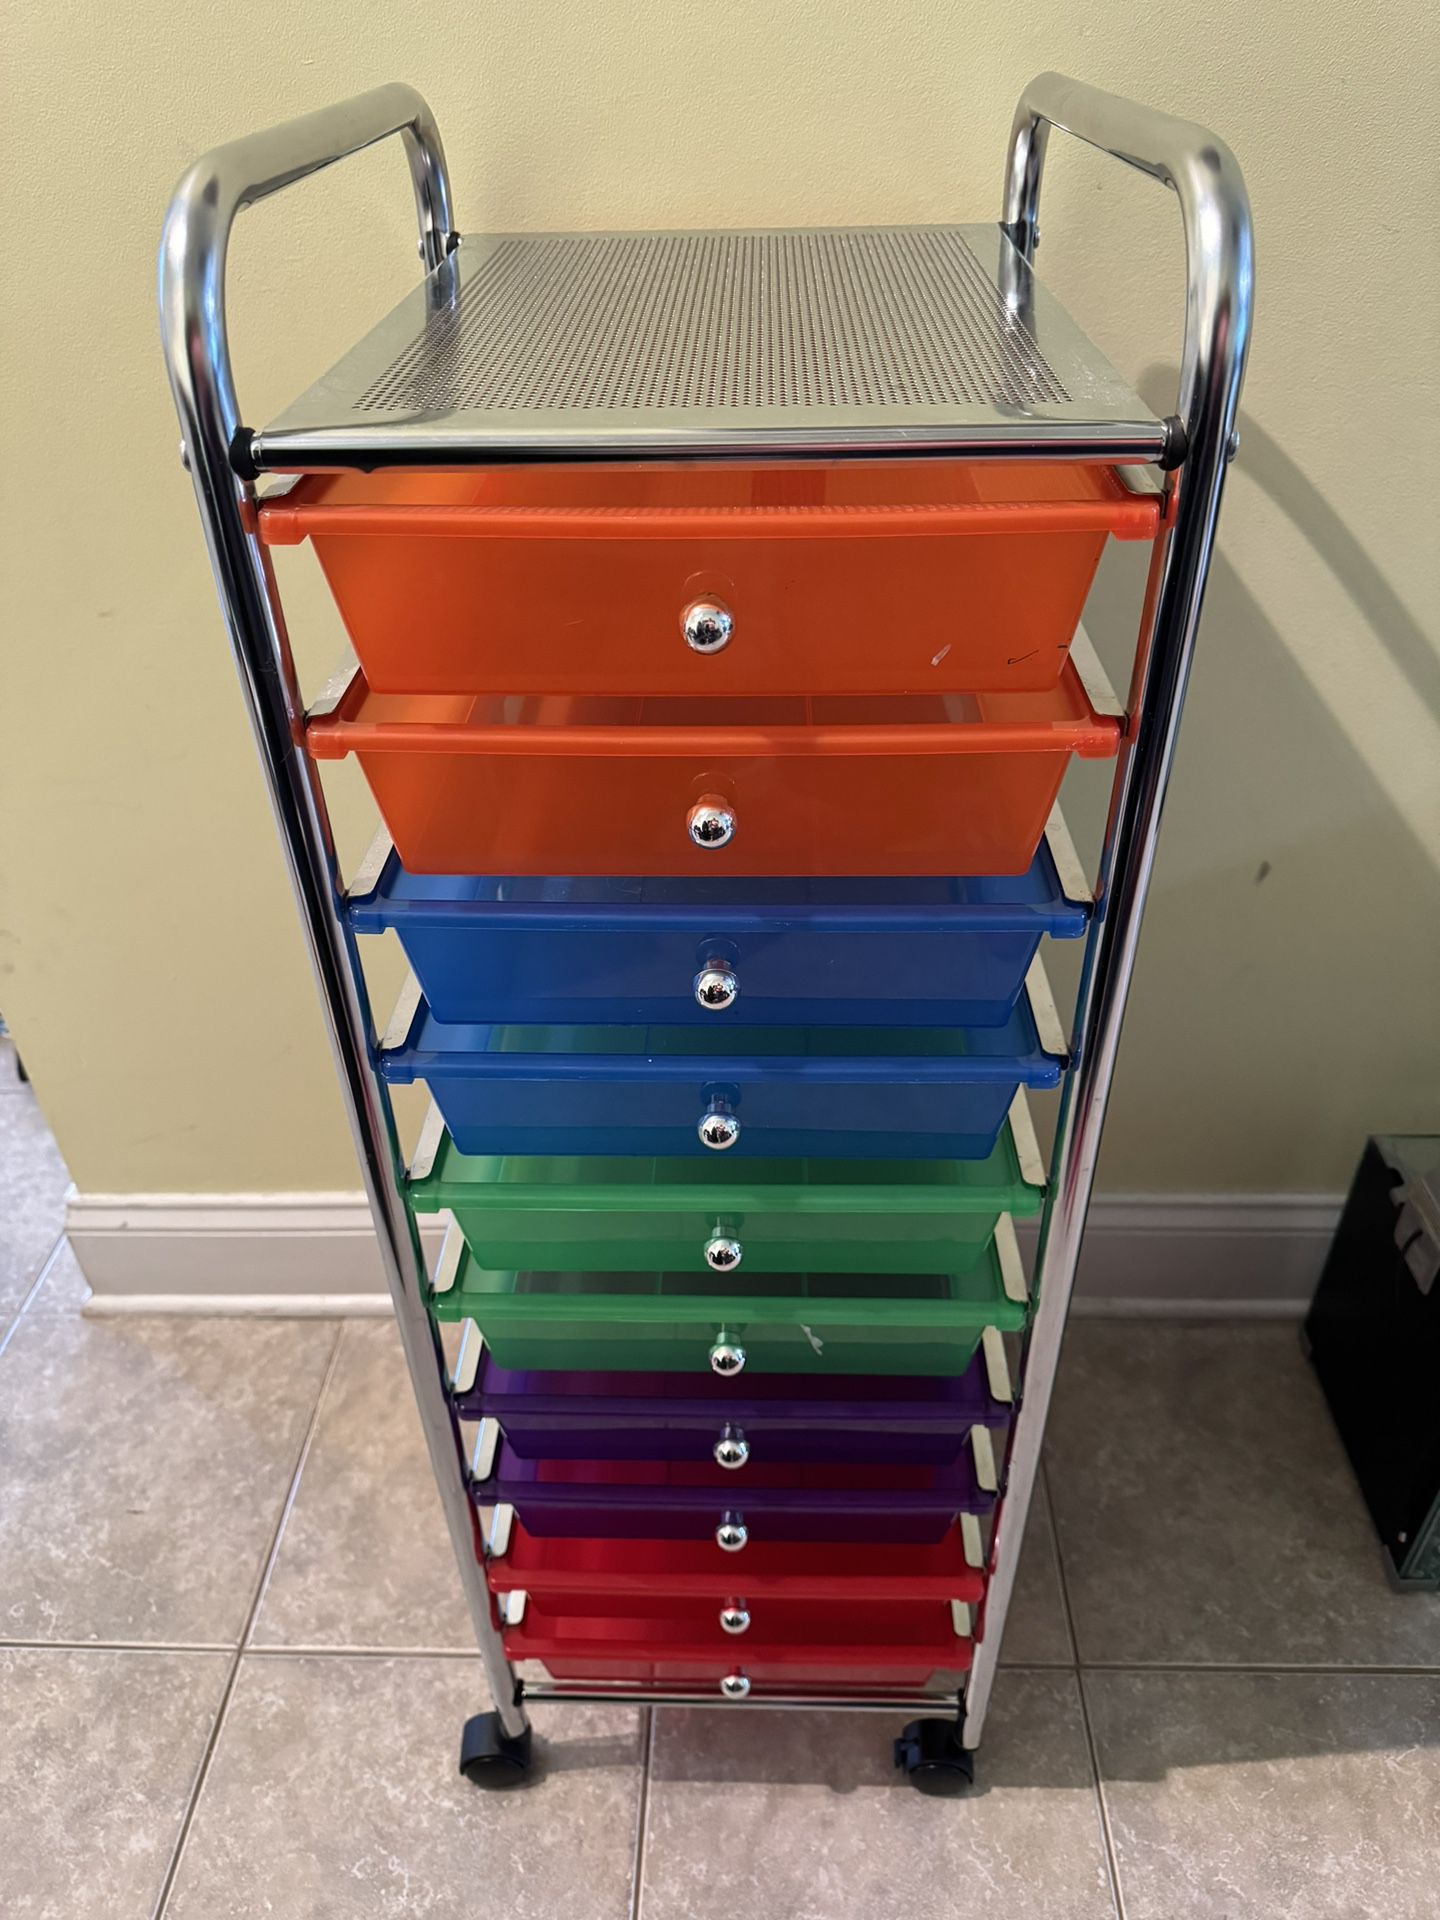 10 drawers organizer rolling cart in GOOD condition!